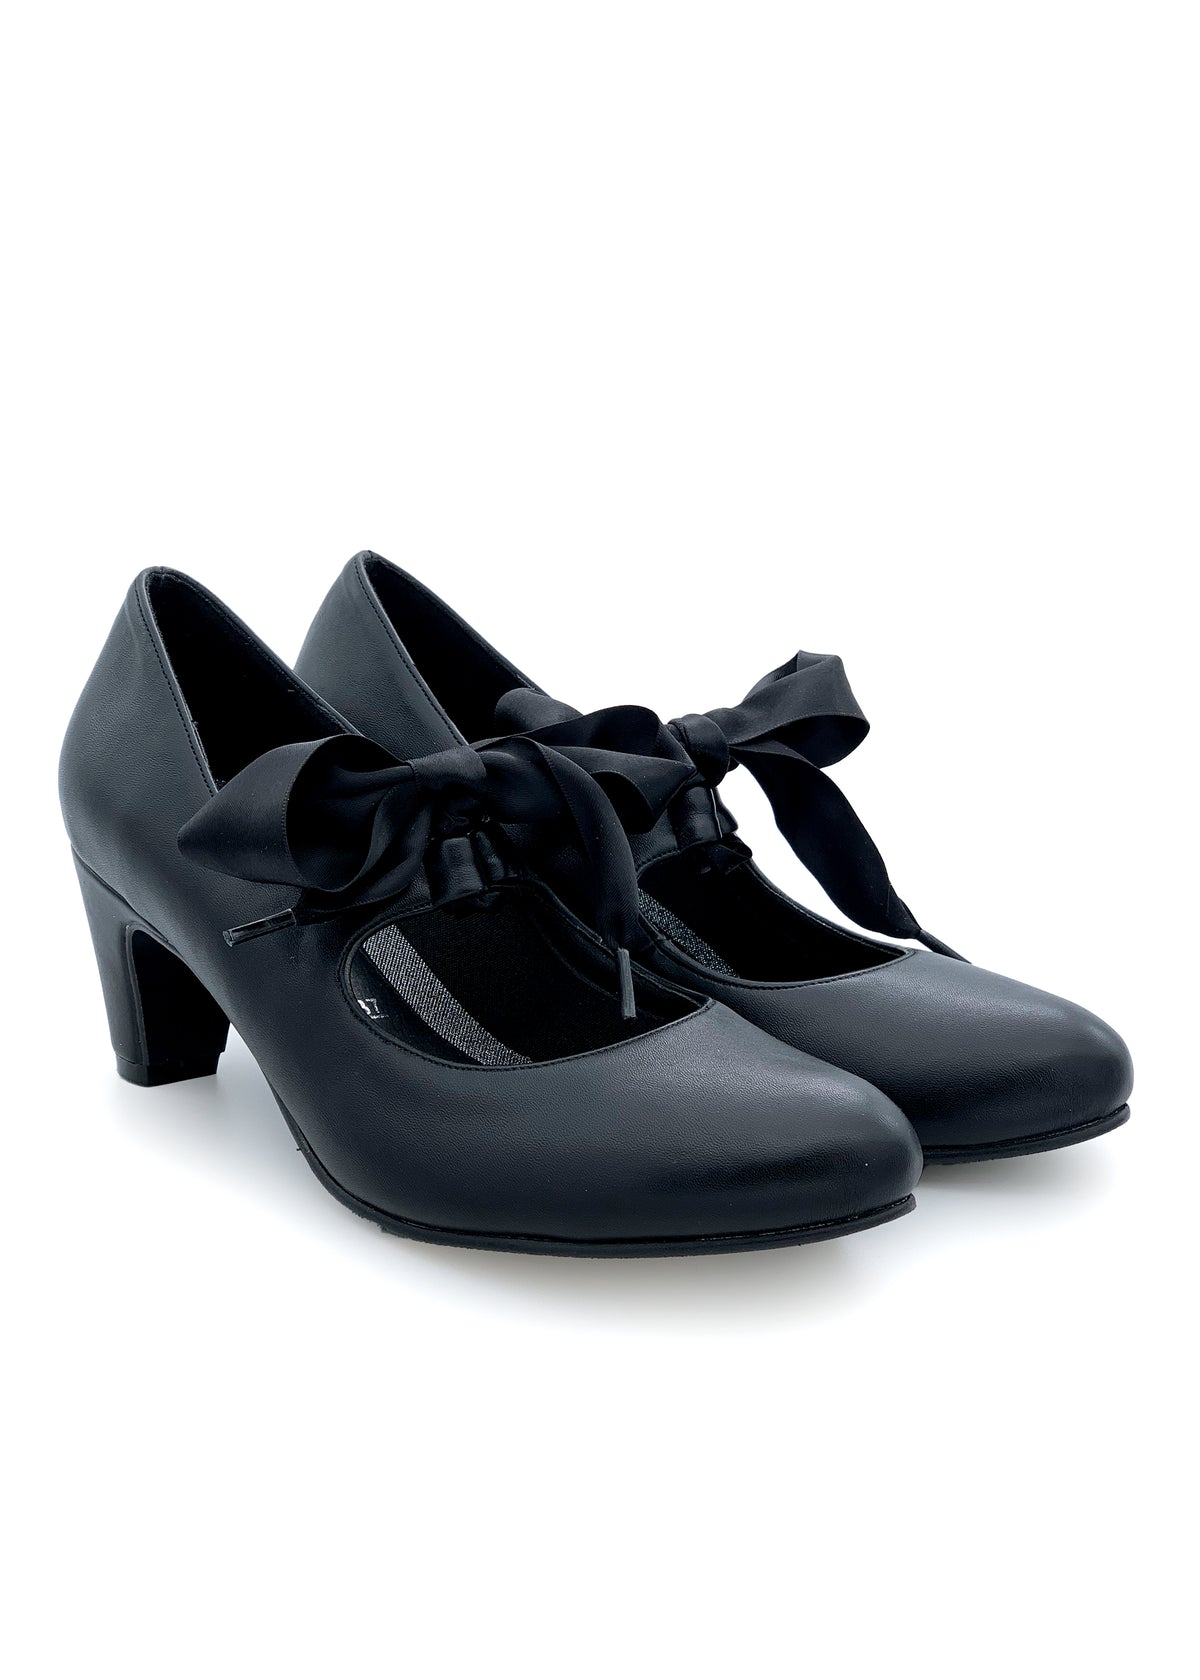 Open toe with silk ribbon bow - black